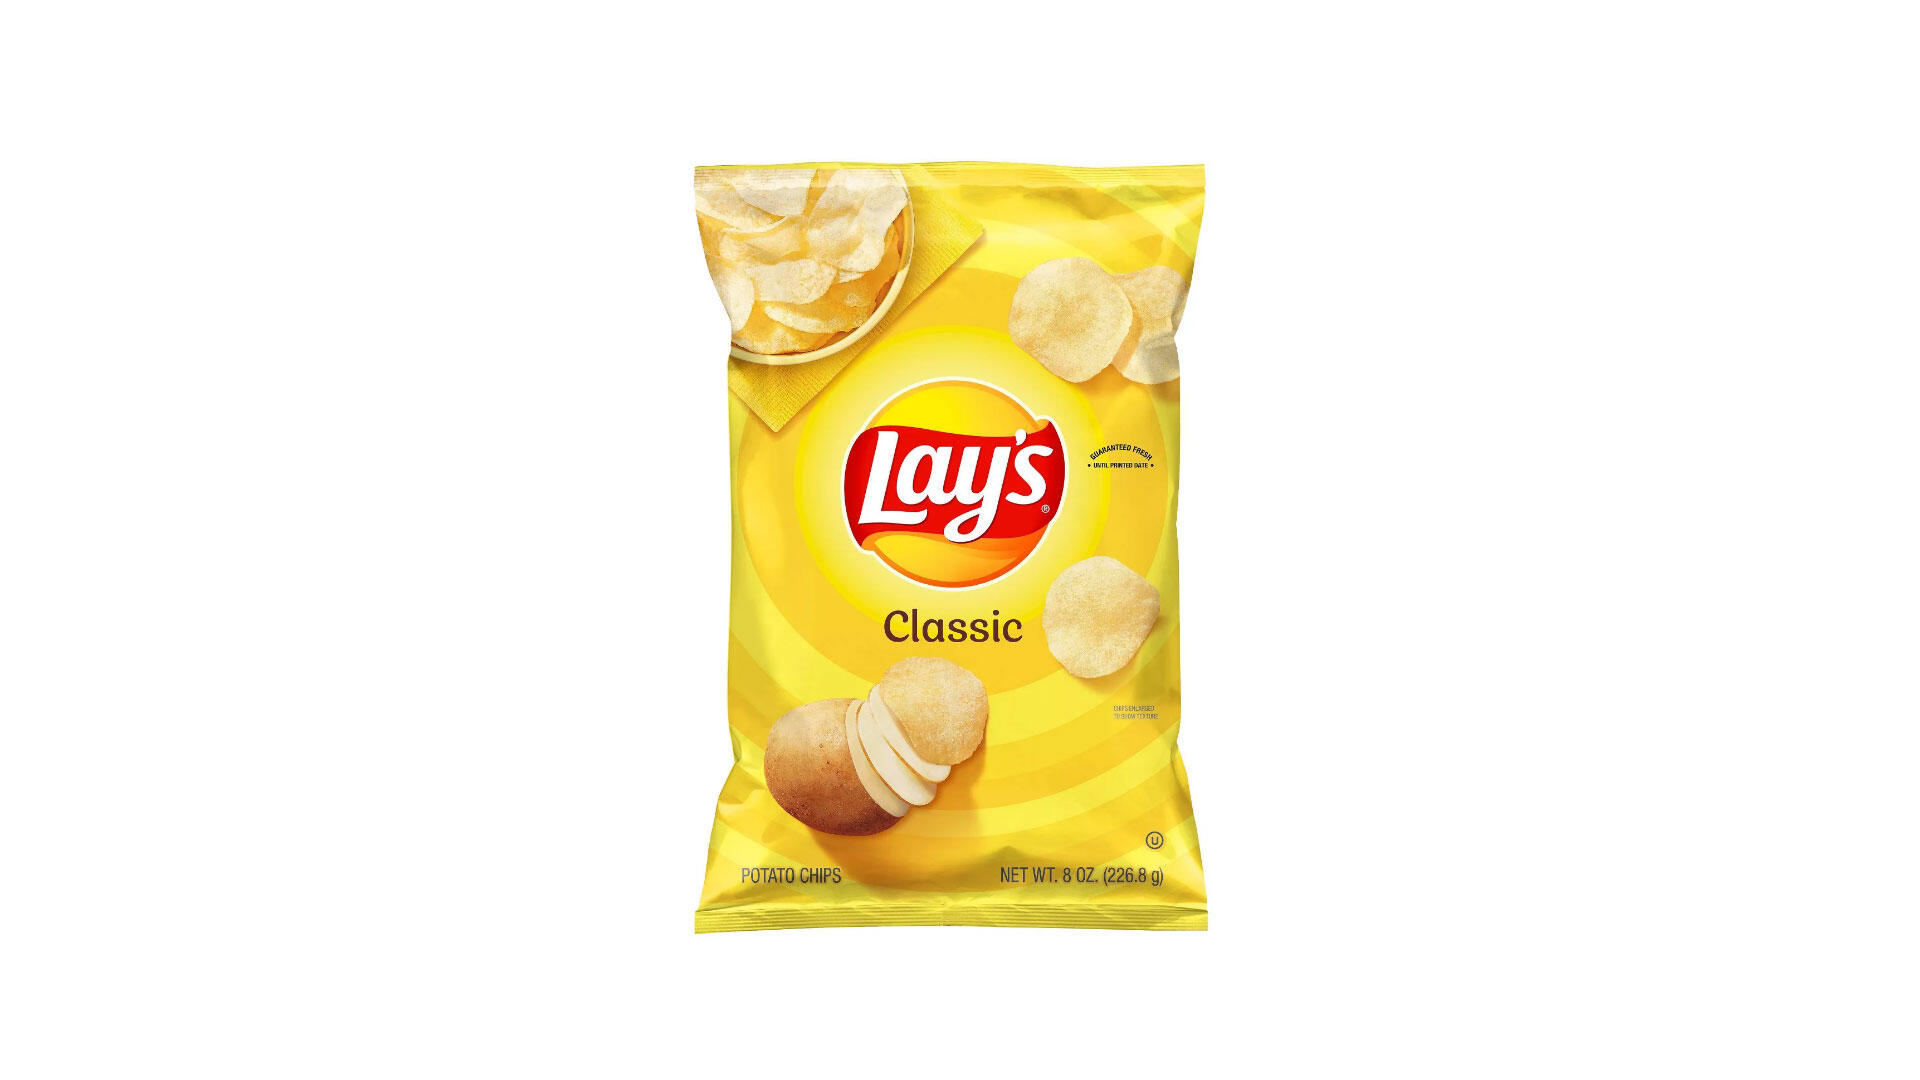 Lay's Chips